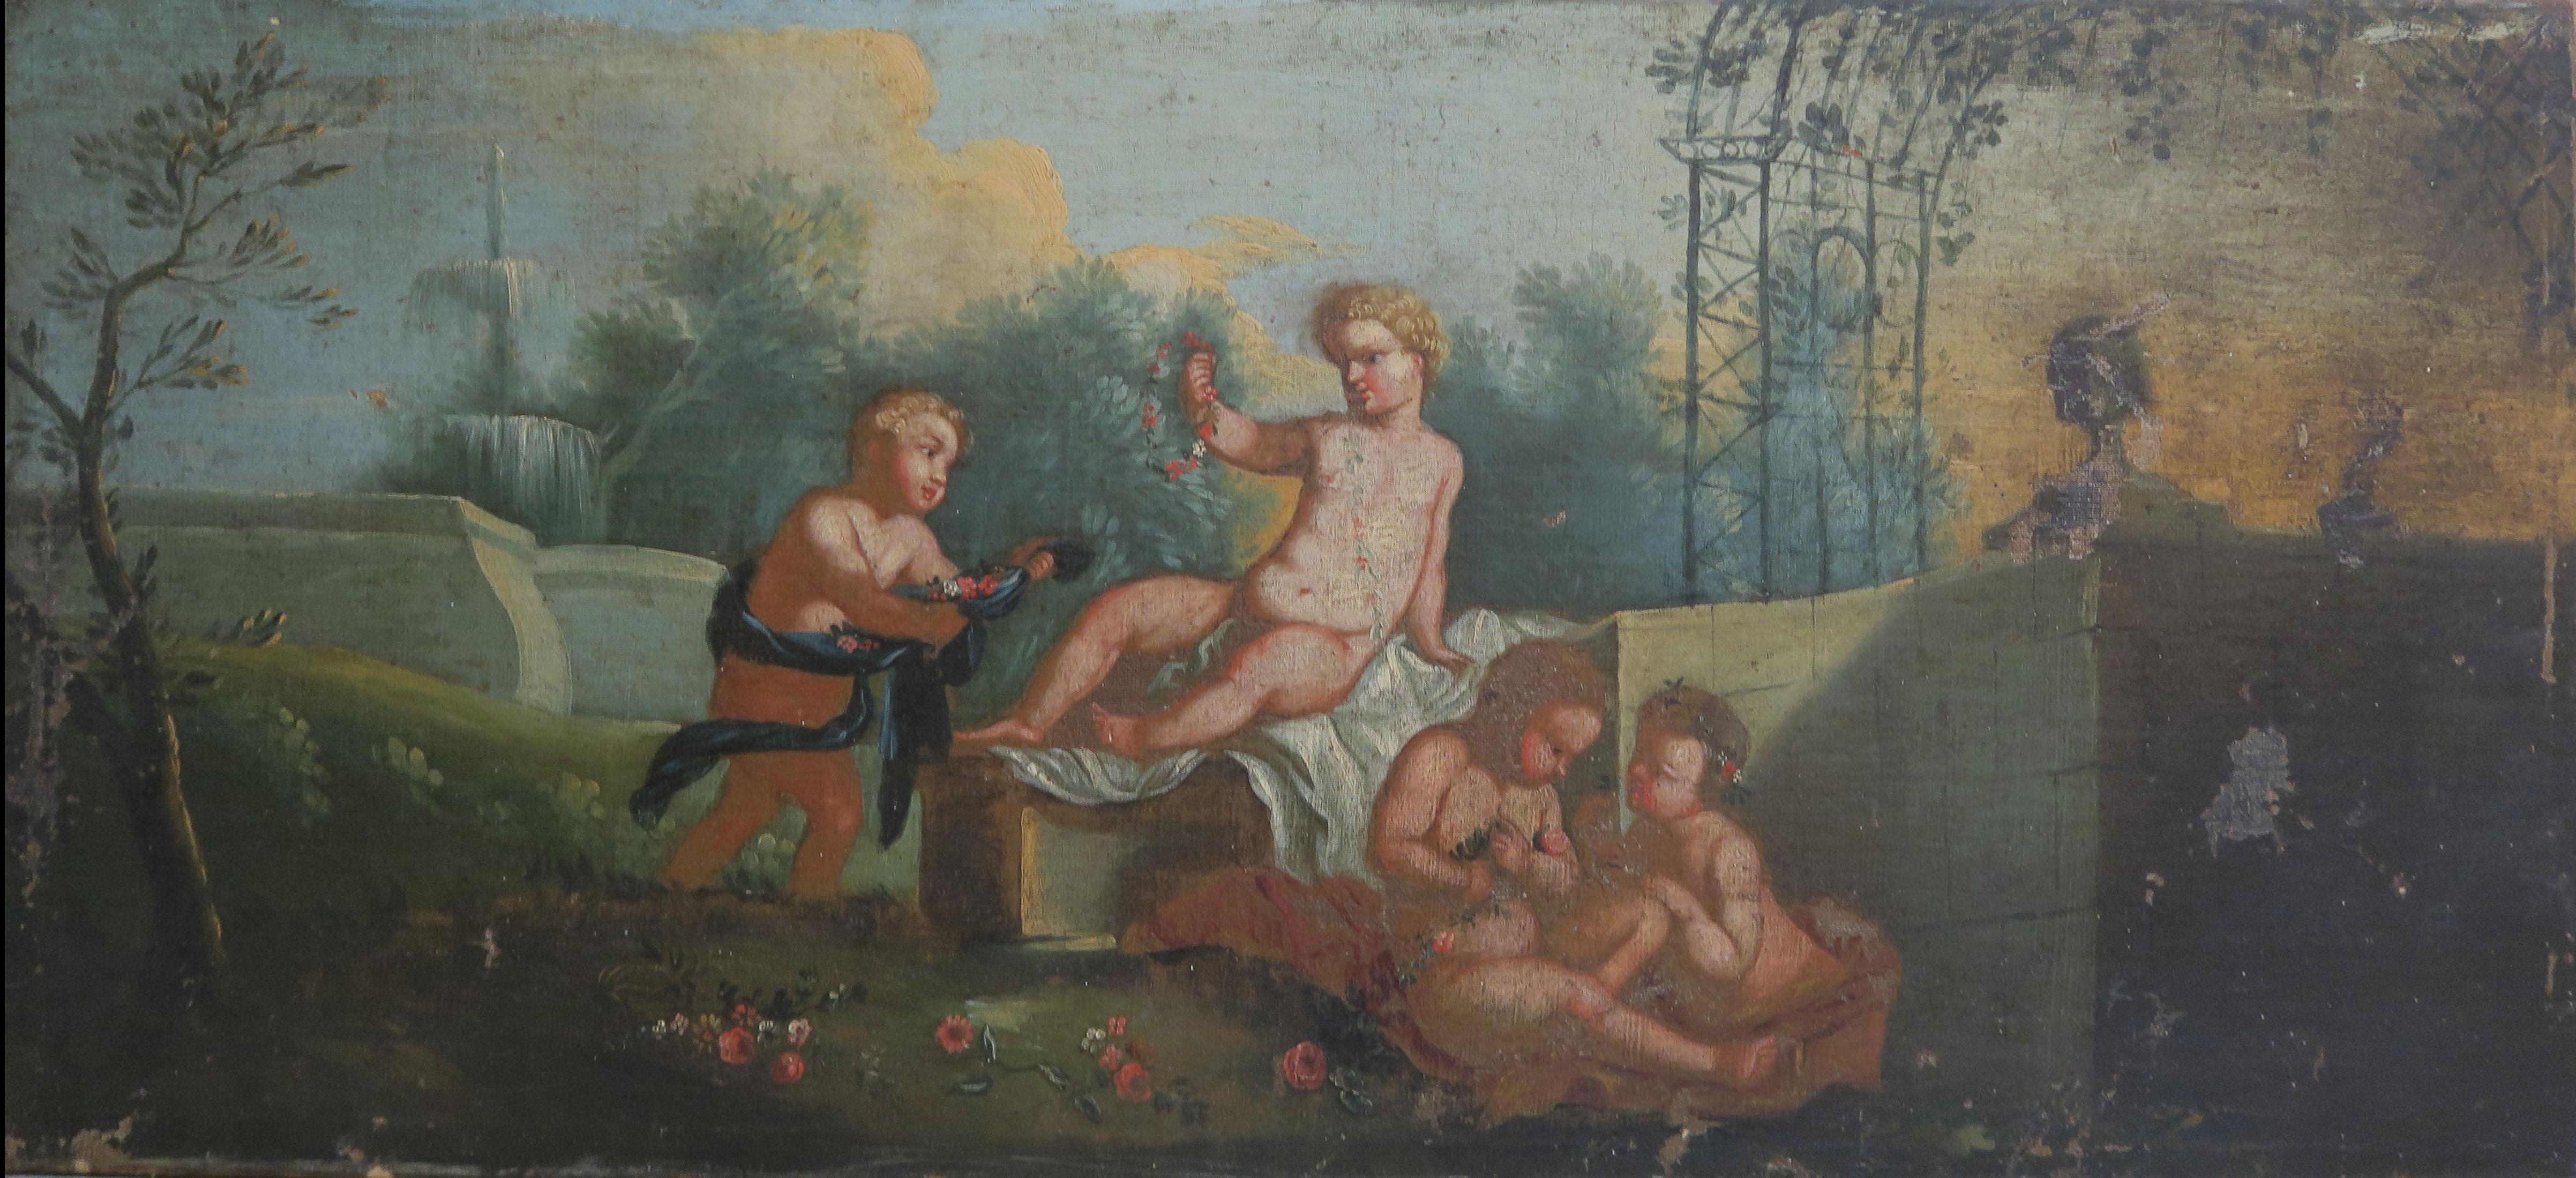 Charming oil on canvas depicting a scene with puttis frolicking in a garden setting. The painting needs slight restoration as depicted in photos. The painting has a beautiful giltwood frame that surrounds it.